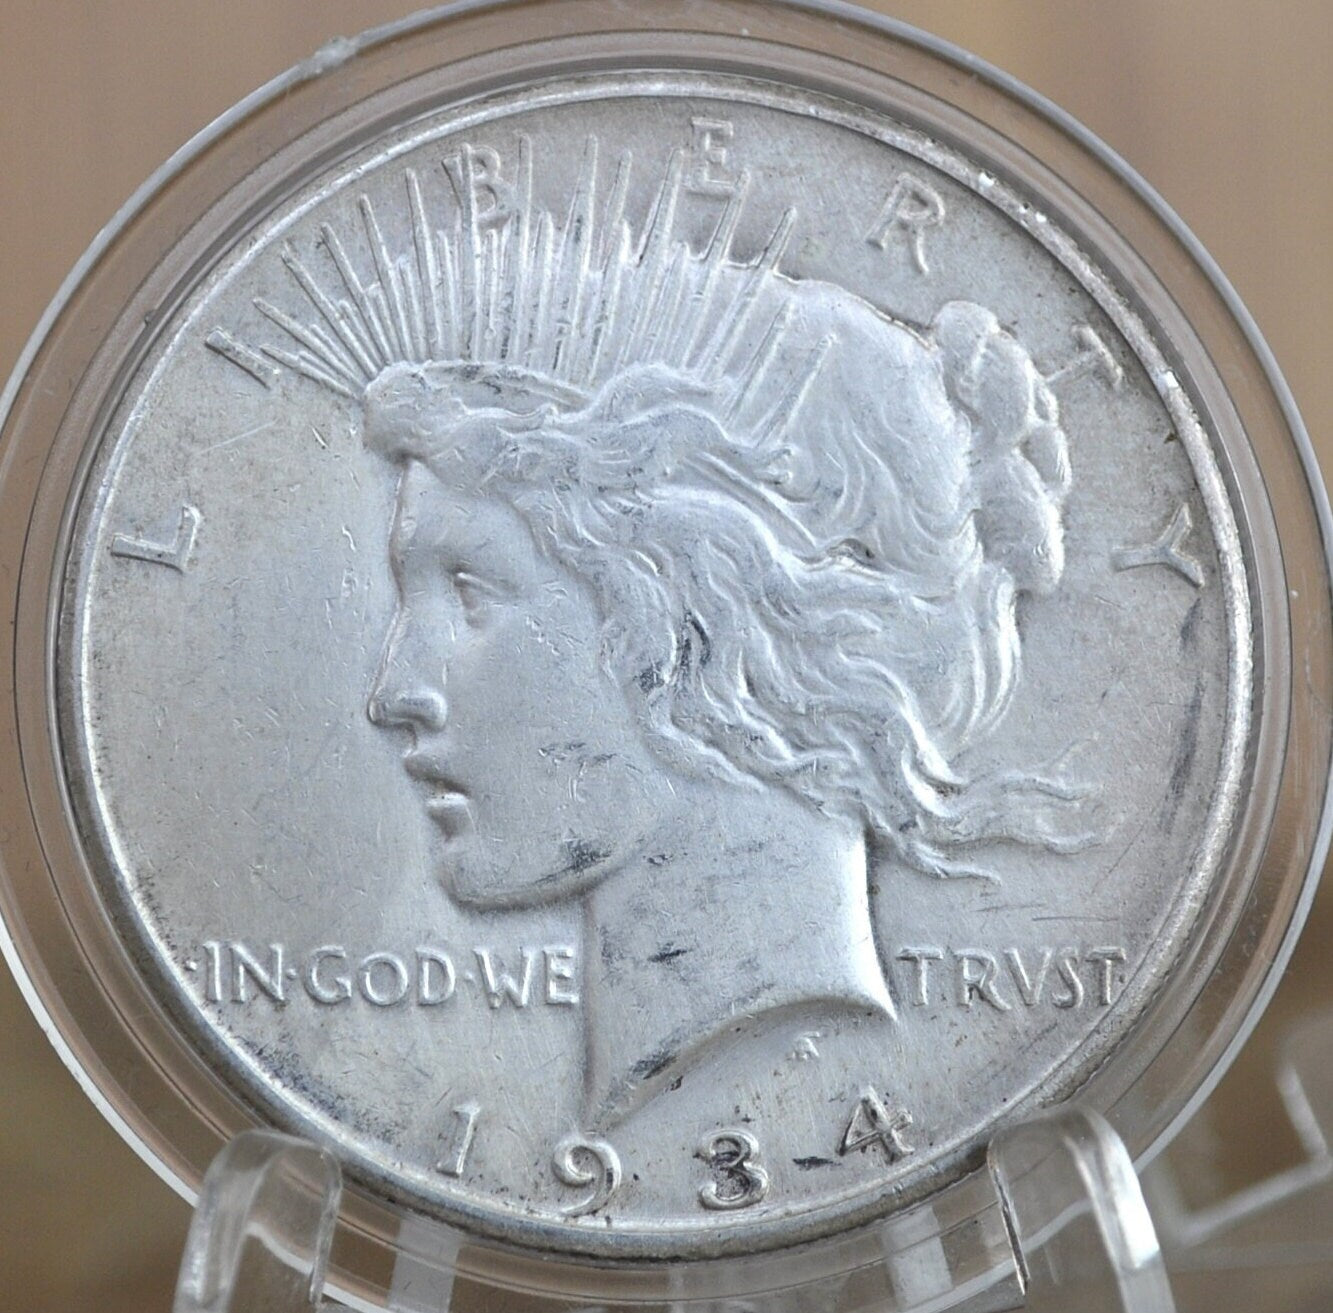 1934-S Peace Dollar - AU (About Uncirculated) Details - 1934 S Peace Silver Dollar - San Francisco Mint - Semi-Key Date Silver Dollar 1934 S